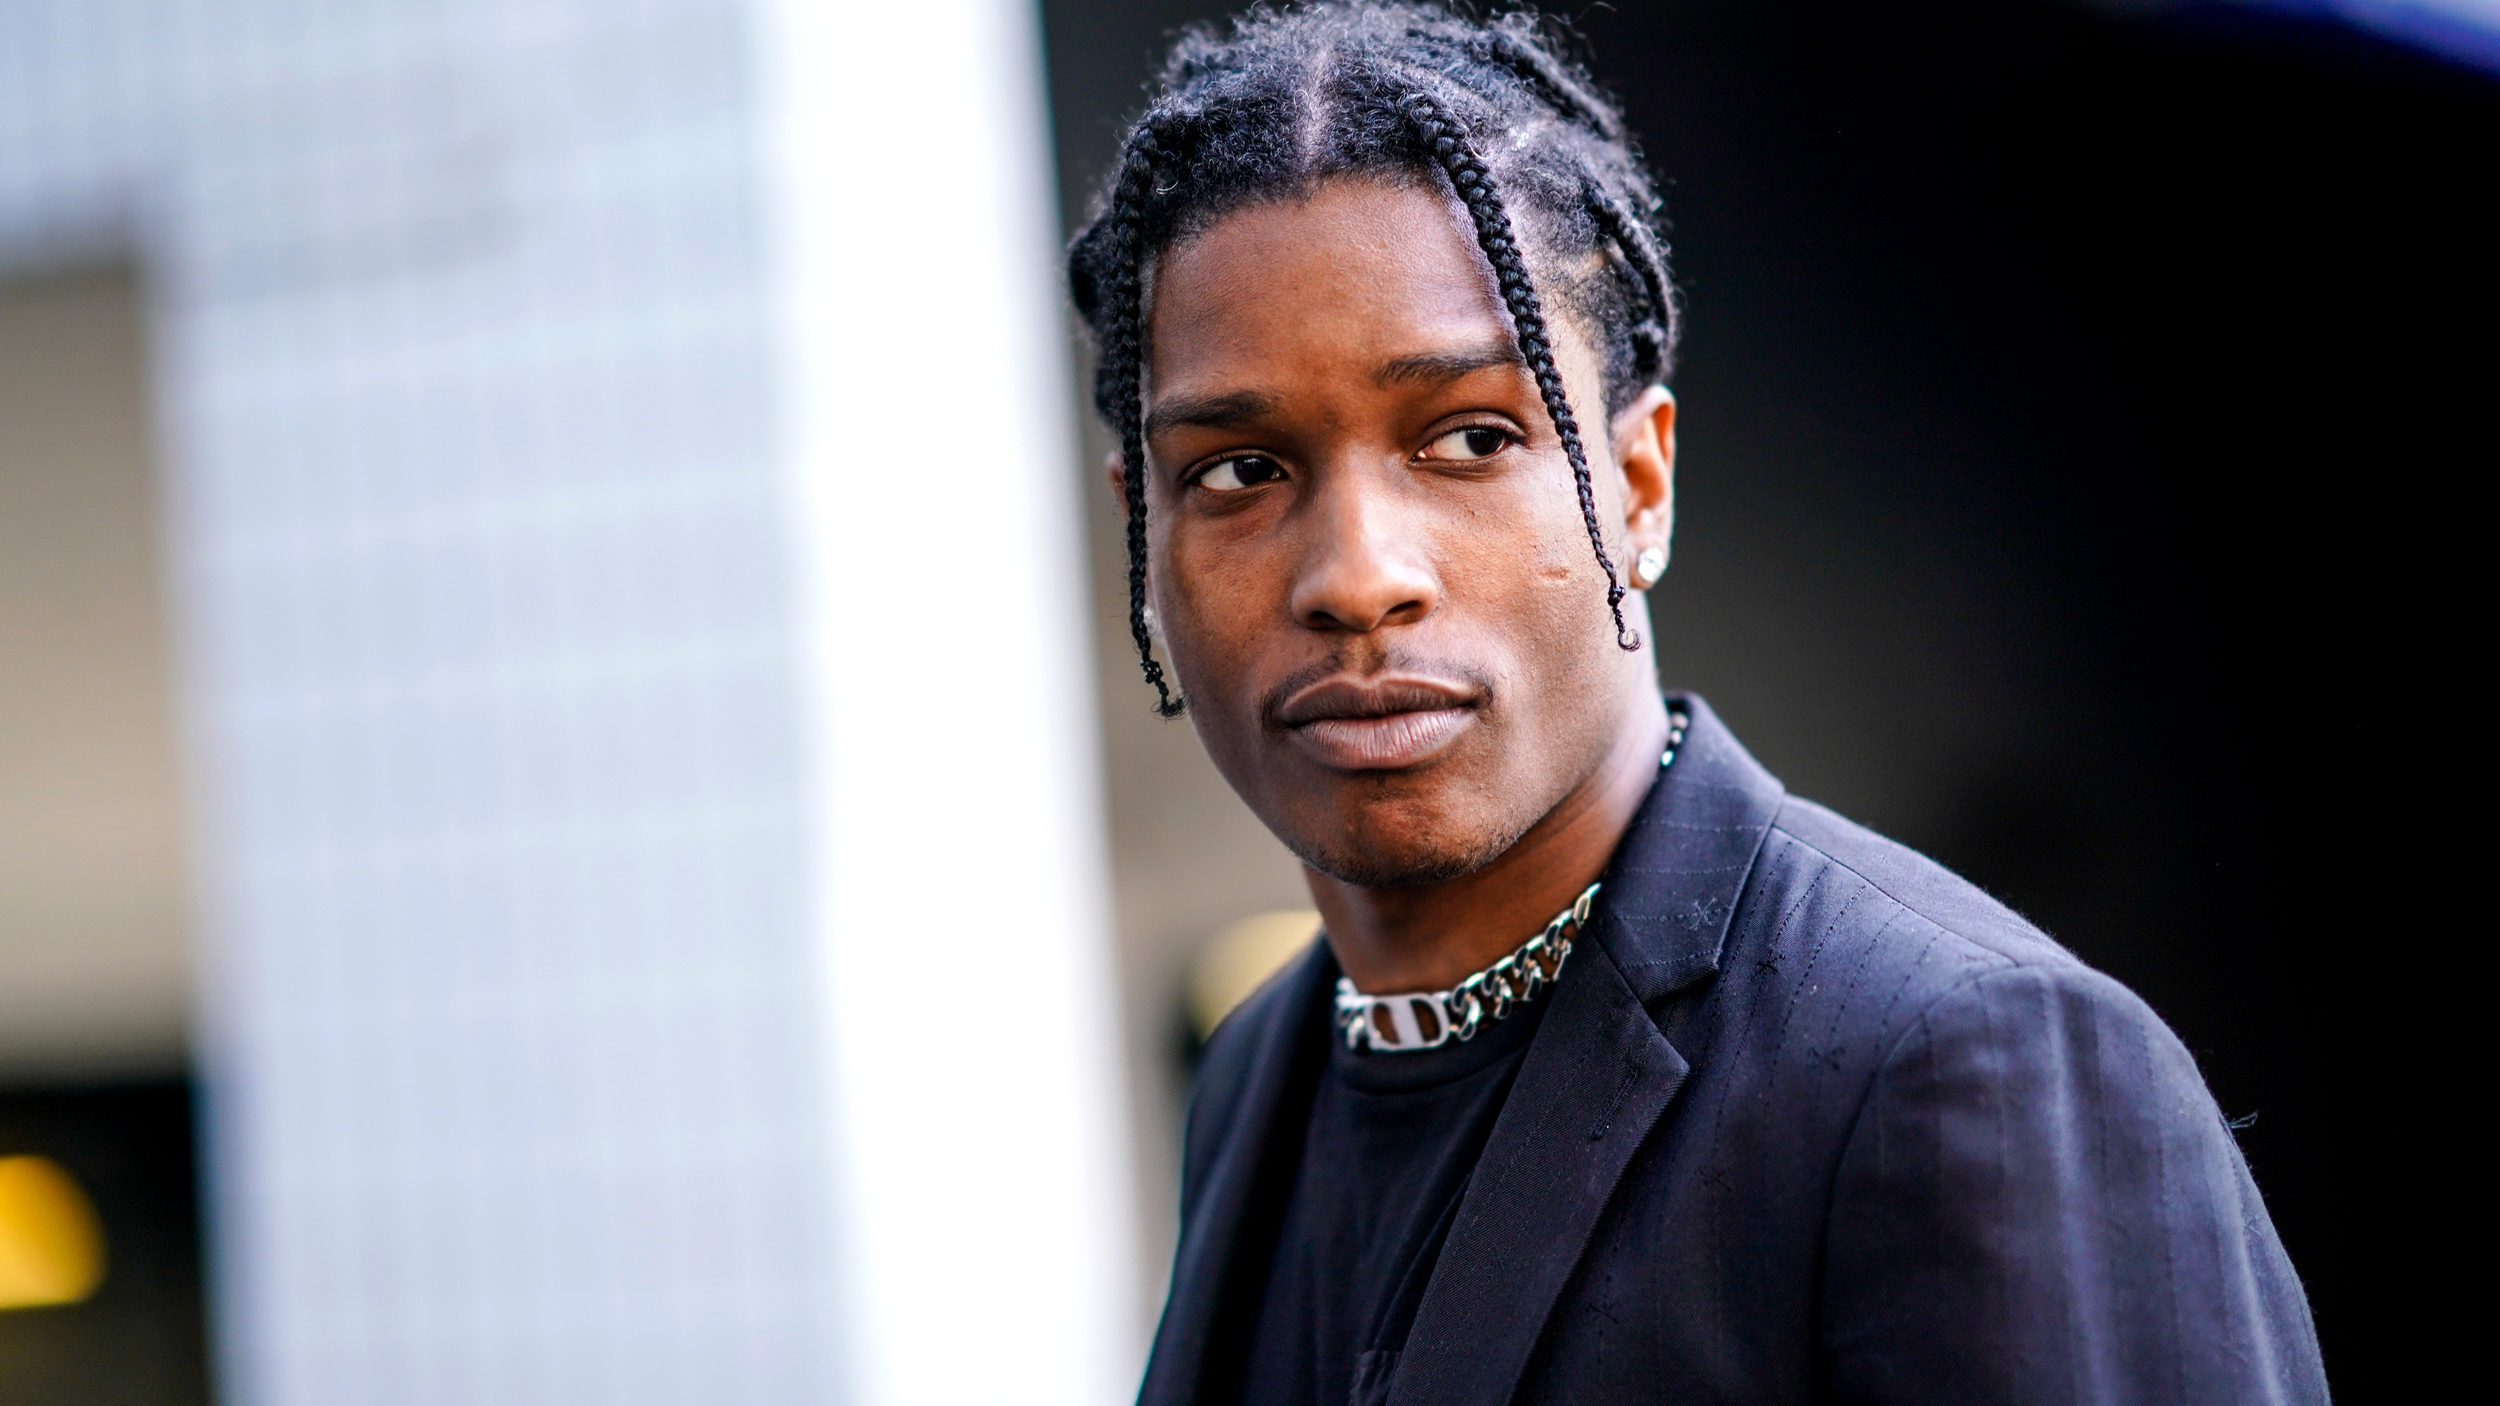 ASAP Rocky’s Swedish Lawyer Shot in Head and Chest